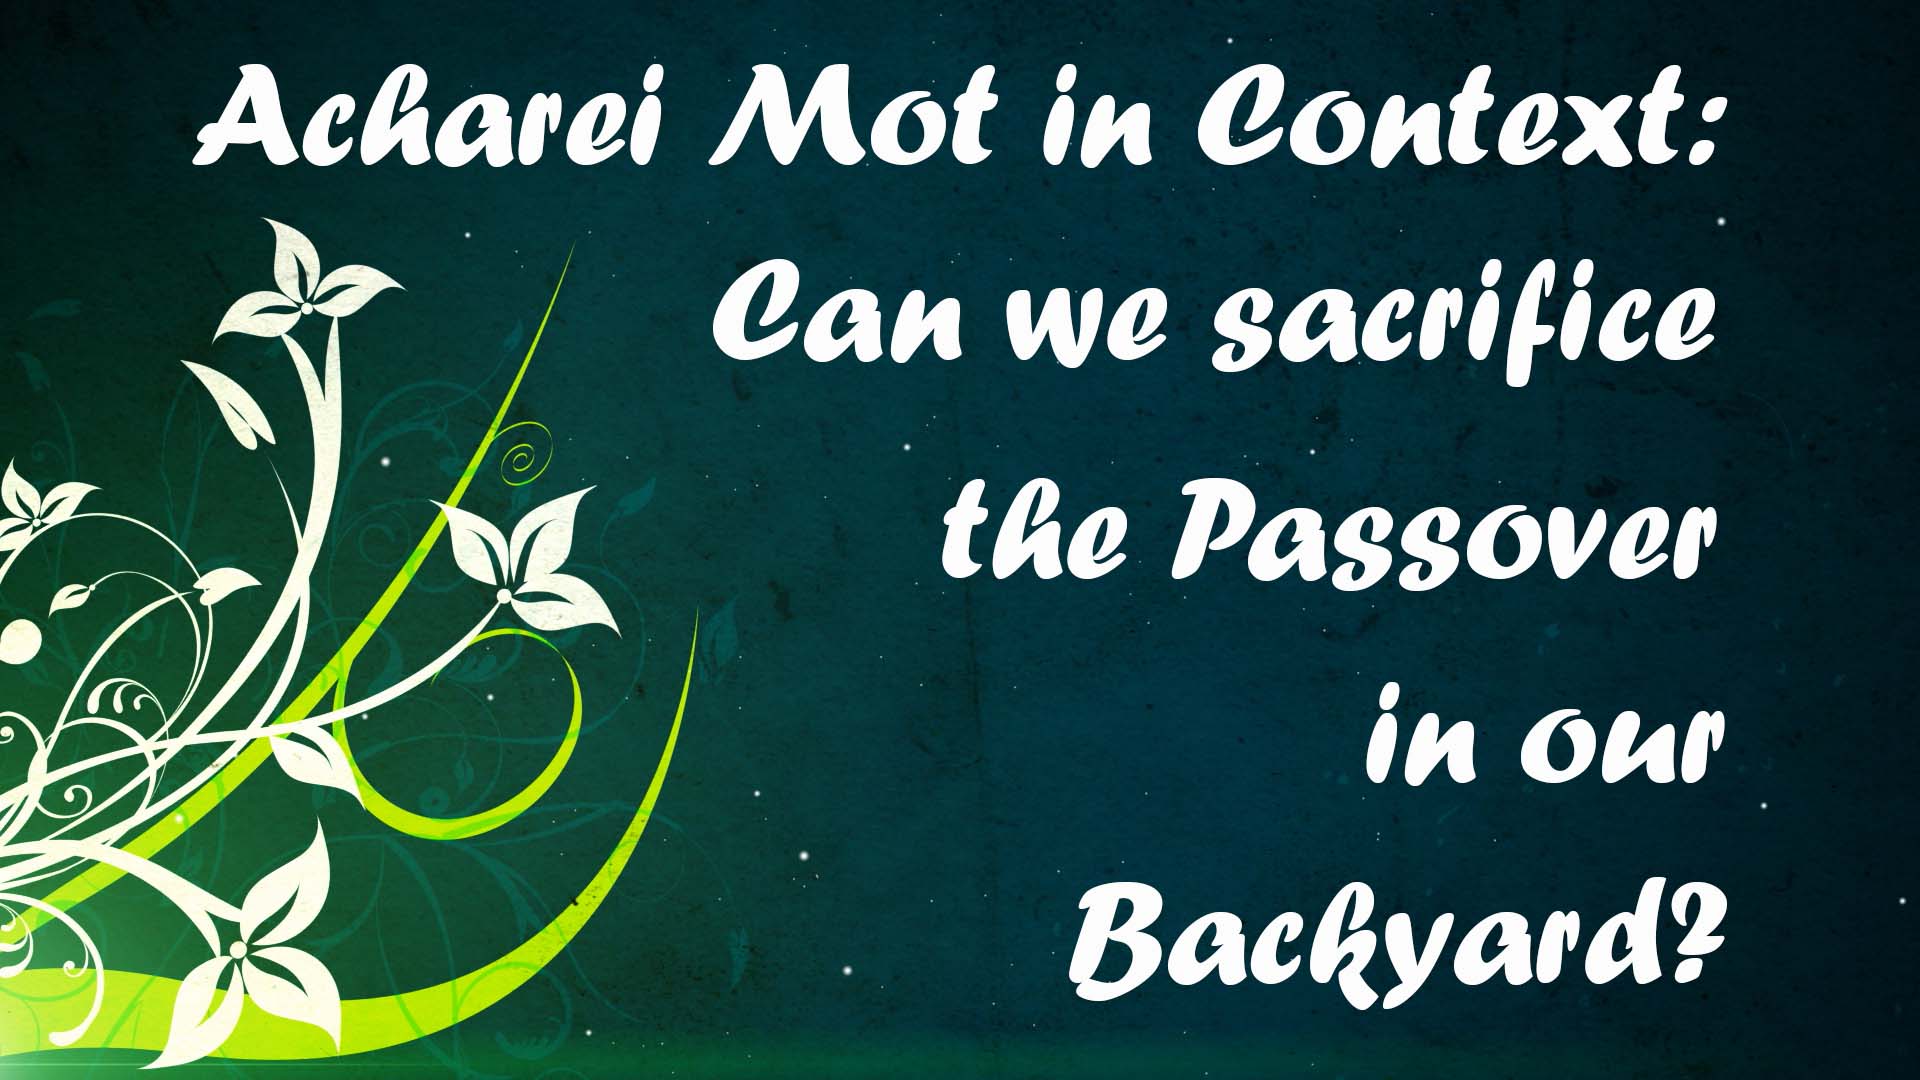 Acharei Mot in the Context of Passover: Can we sacrifice a Passover lamb in the backyard?